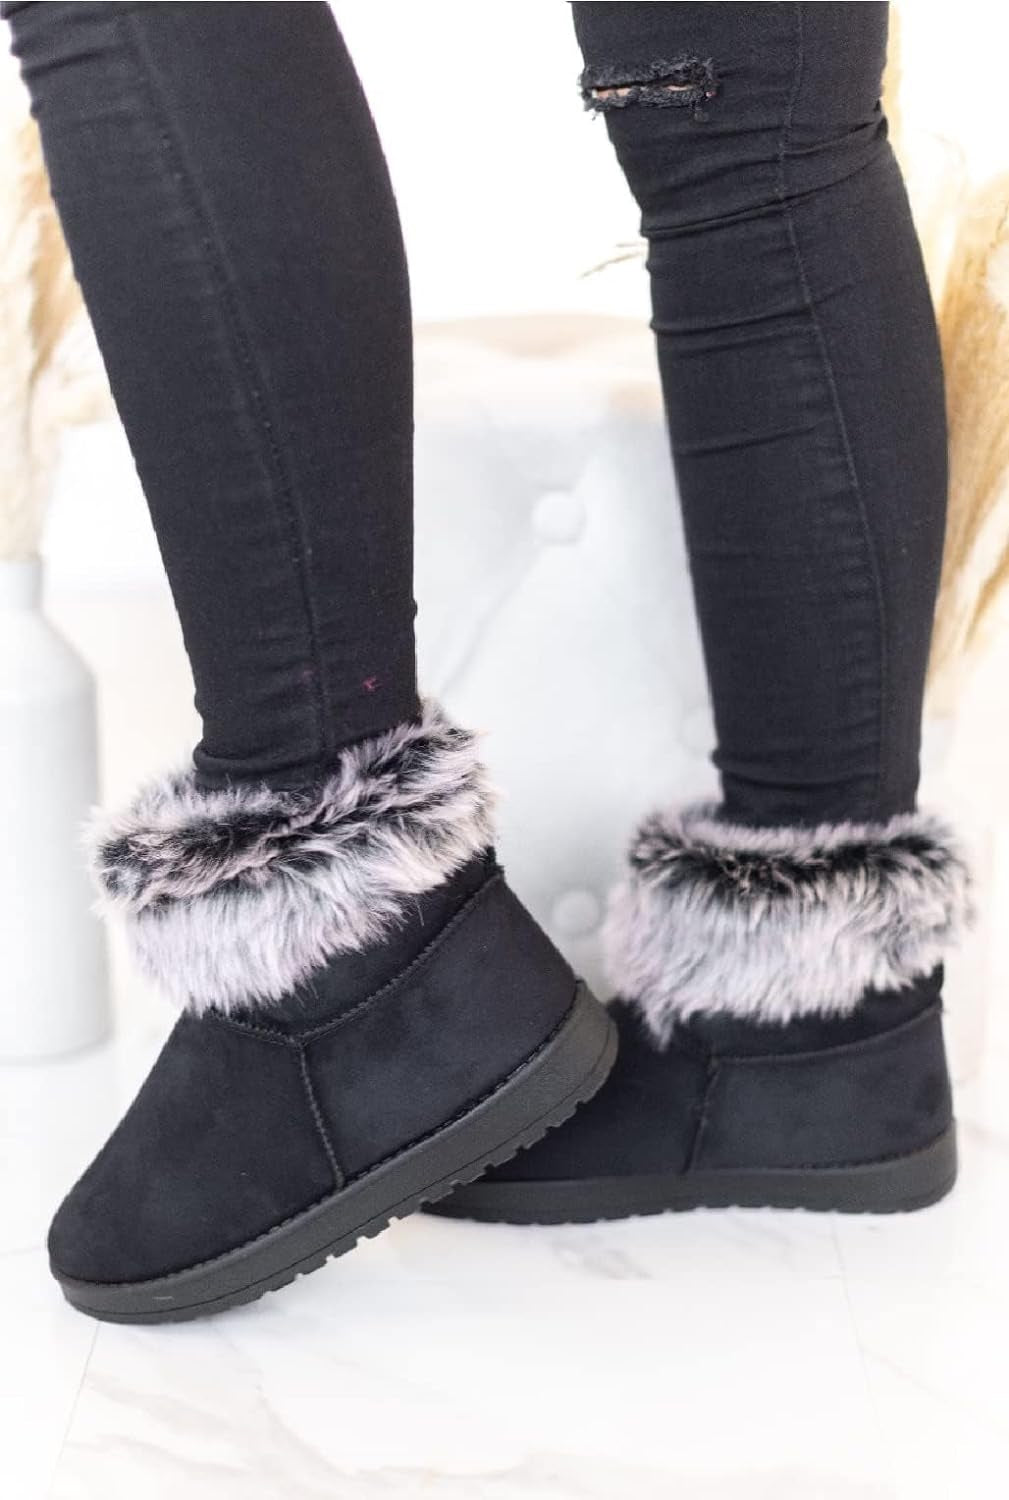 WOMENS FAUX FLUFFY FUR LINED WARM LADIES ANKLE WINTER SNUGG SHOES BOOTS SIZES